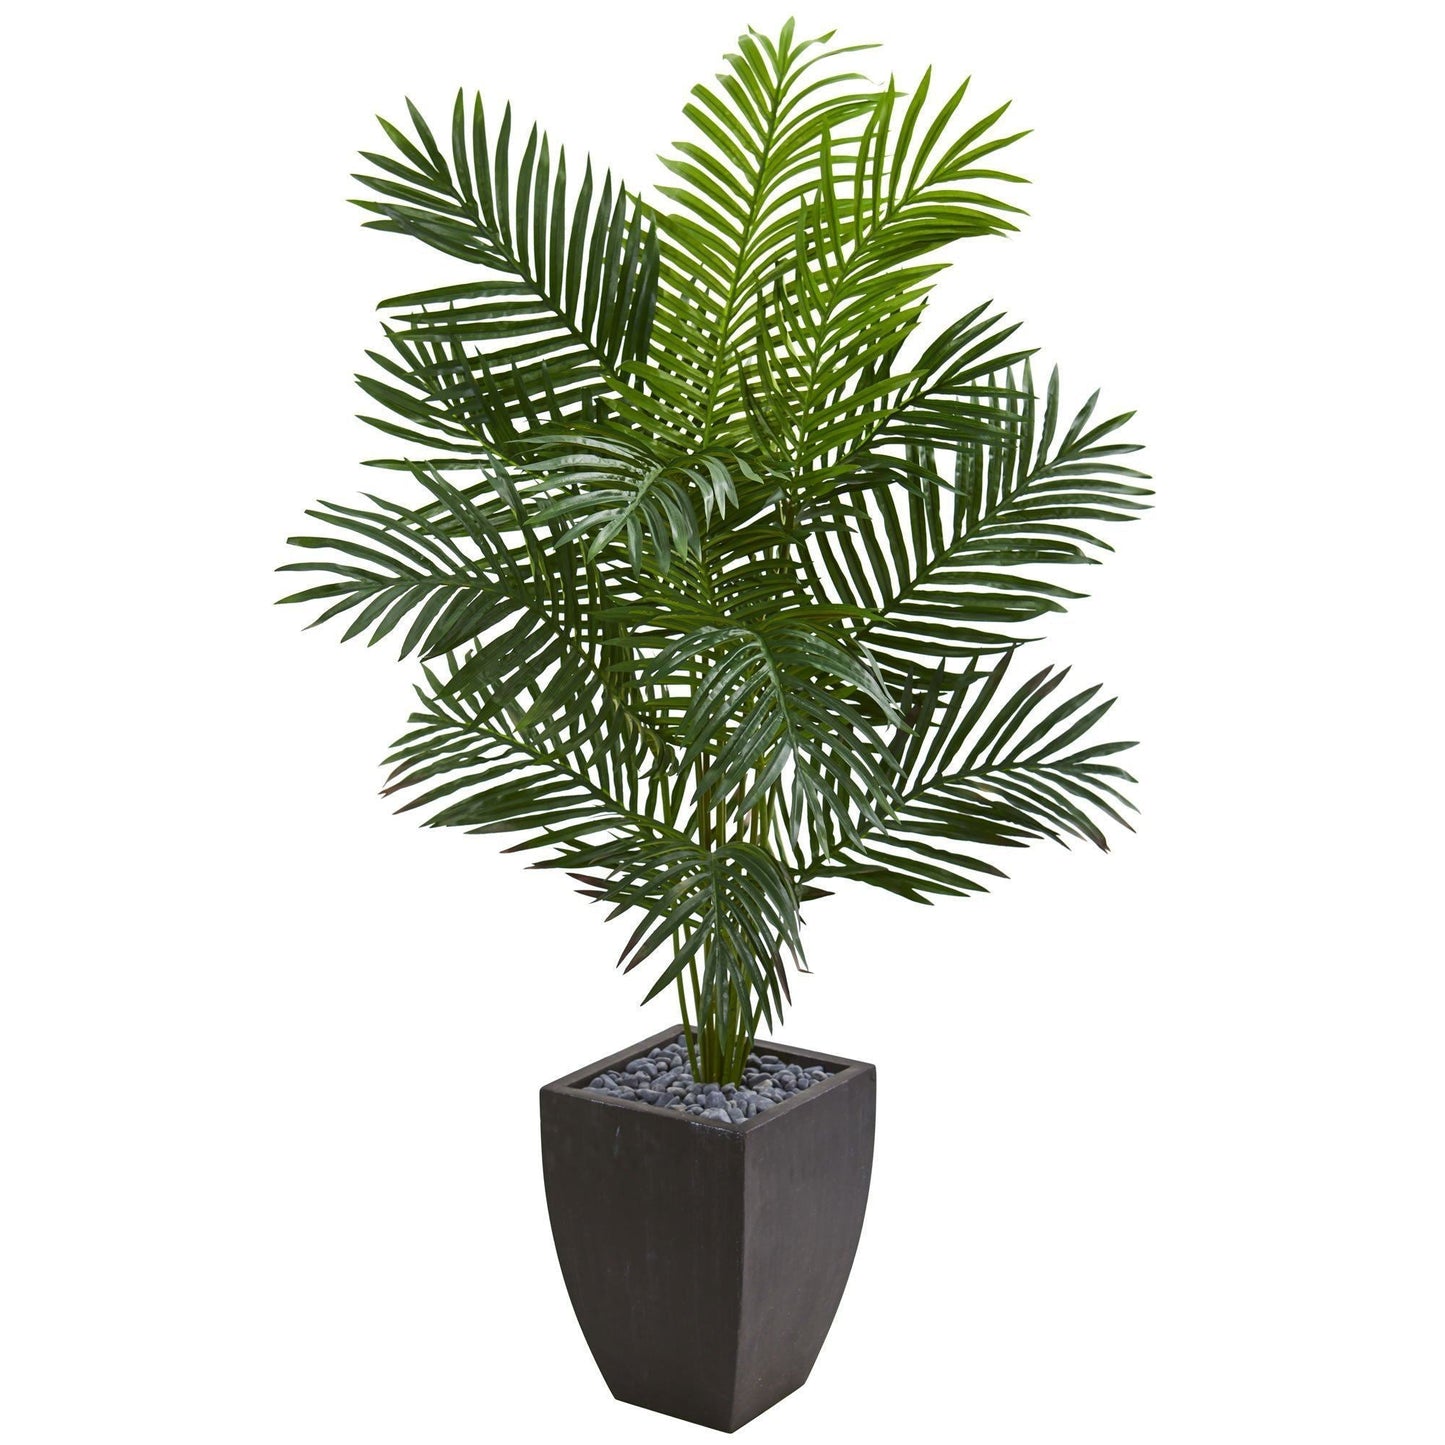 5.5’ Paradise Artificial Palm Tree in Black Planter by Nearly Natural